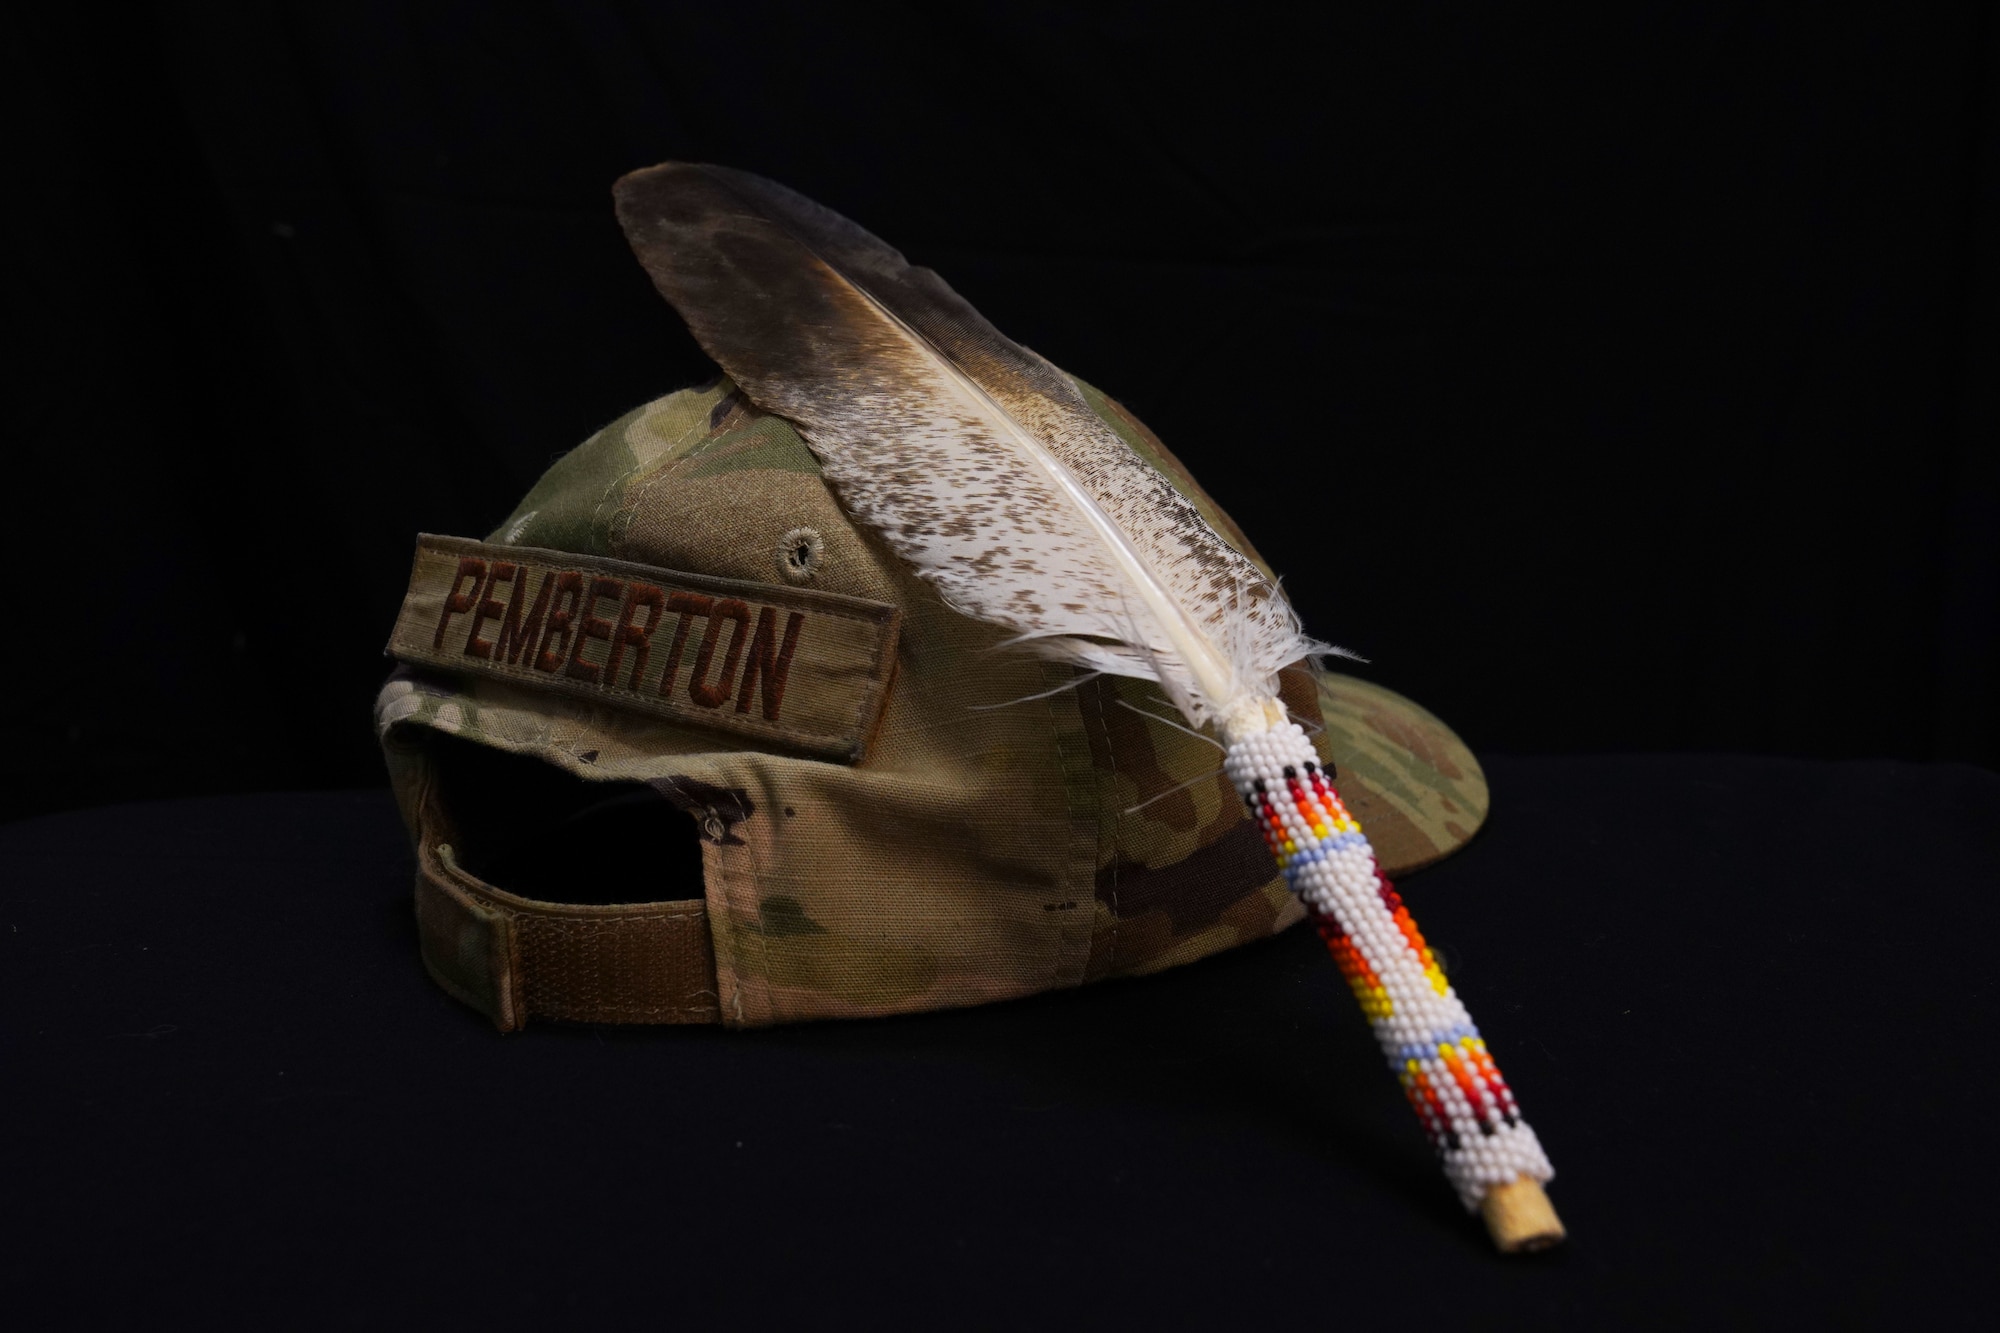 U.S. Air Force Tech. Sgt. Brady Pemberton, 50th Intelligence Squadron signals analyst, OCP tactical hat is shown with a decorated feather against it, Dec. 1, 2023, at Beale Air Force Base, California.